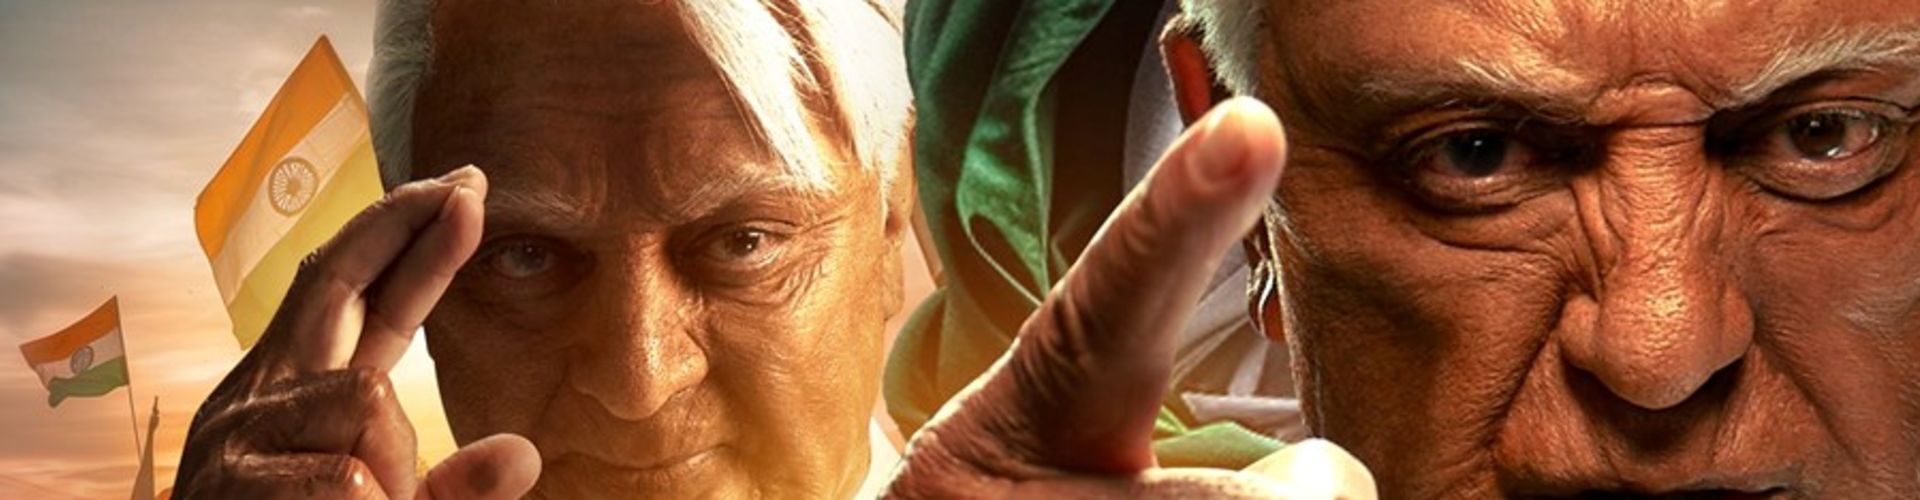 Indian 2 New Poster Is Out, Meet Senapathy